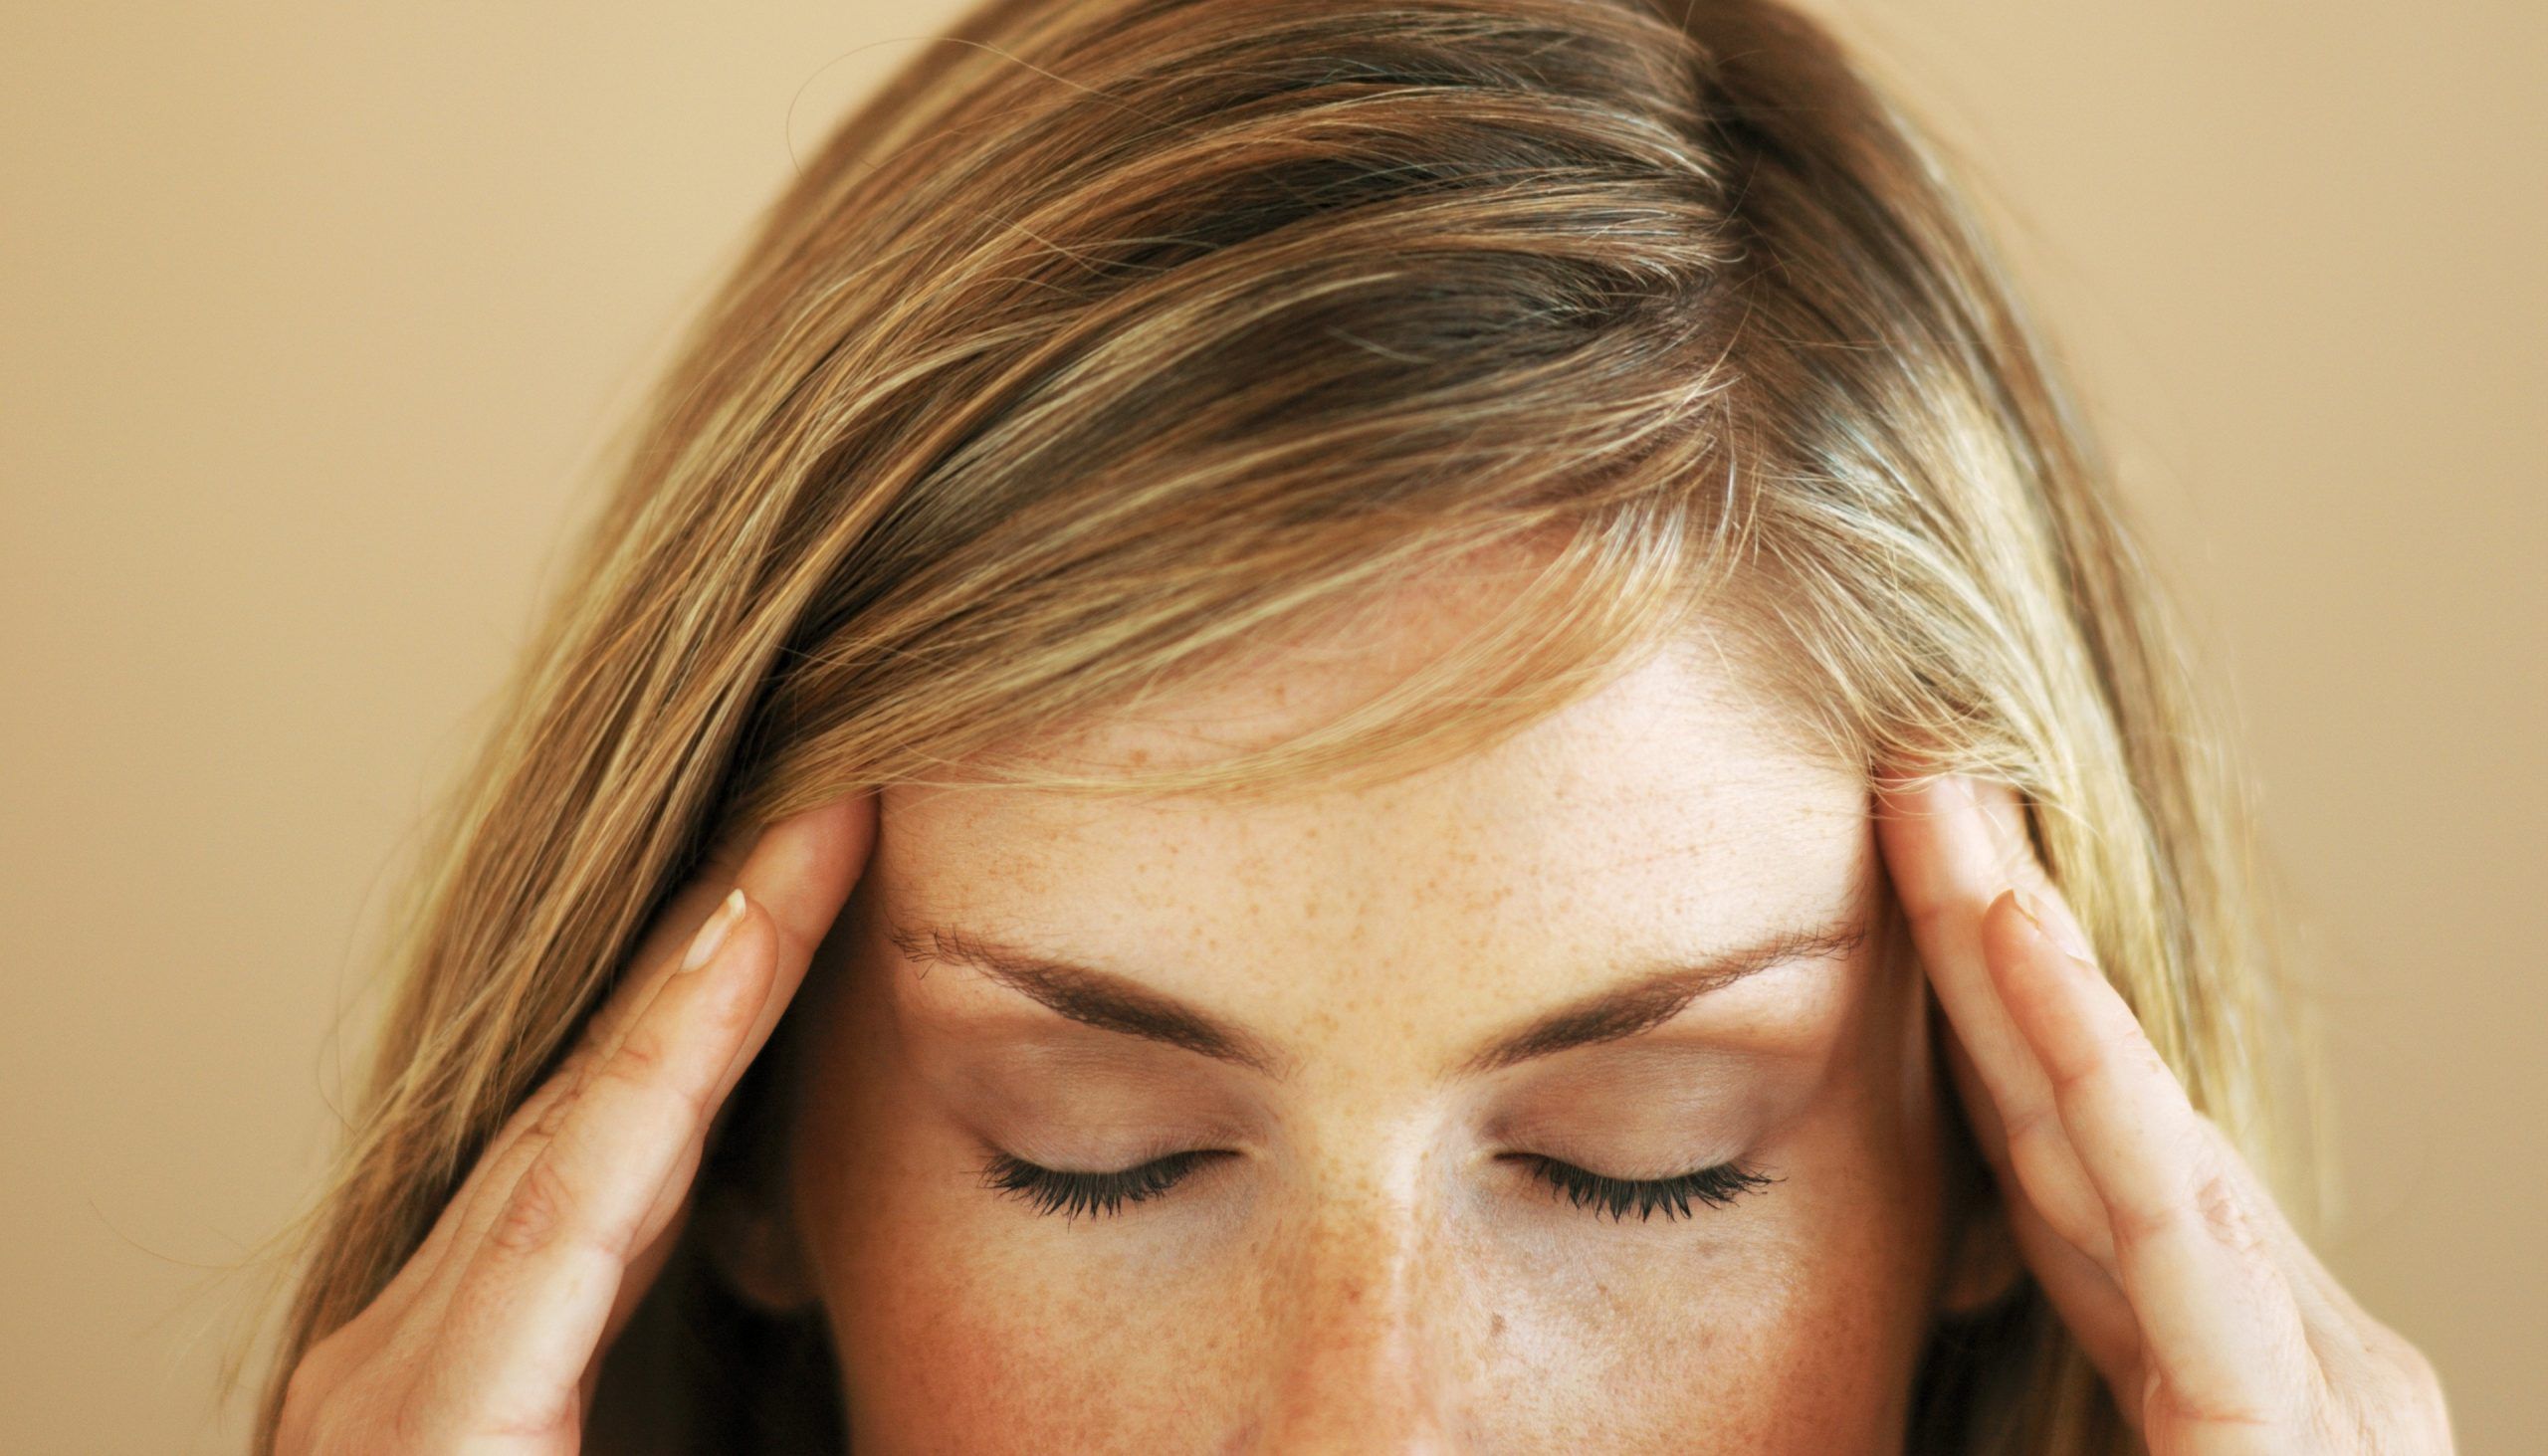 Getting more than 15 headaches a month is more common in women and girls than boys and men. GETTY